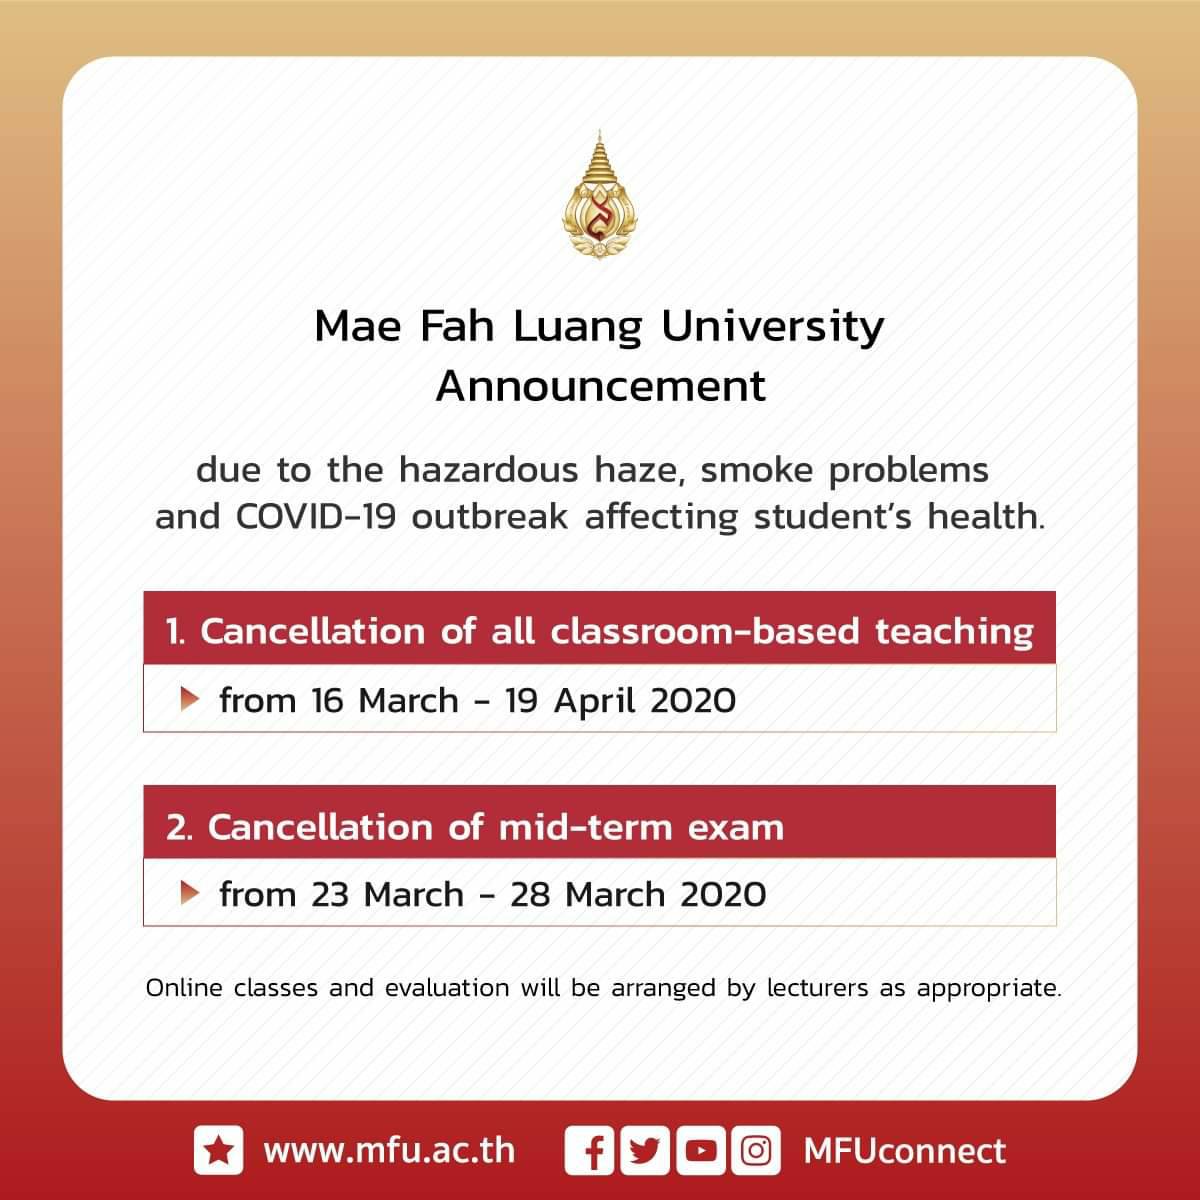 Frequently Asked Questions (FAQ) for the Cancellation of Classroom-Based Teaching and Examinations